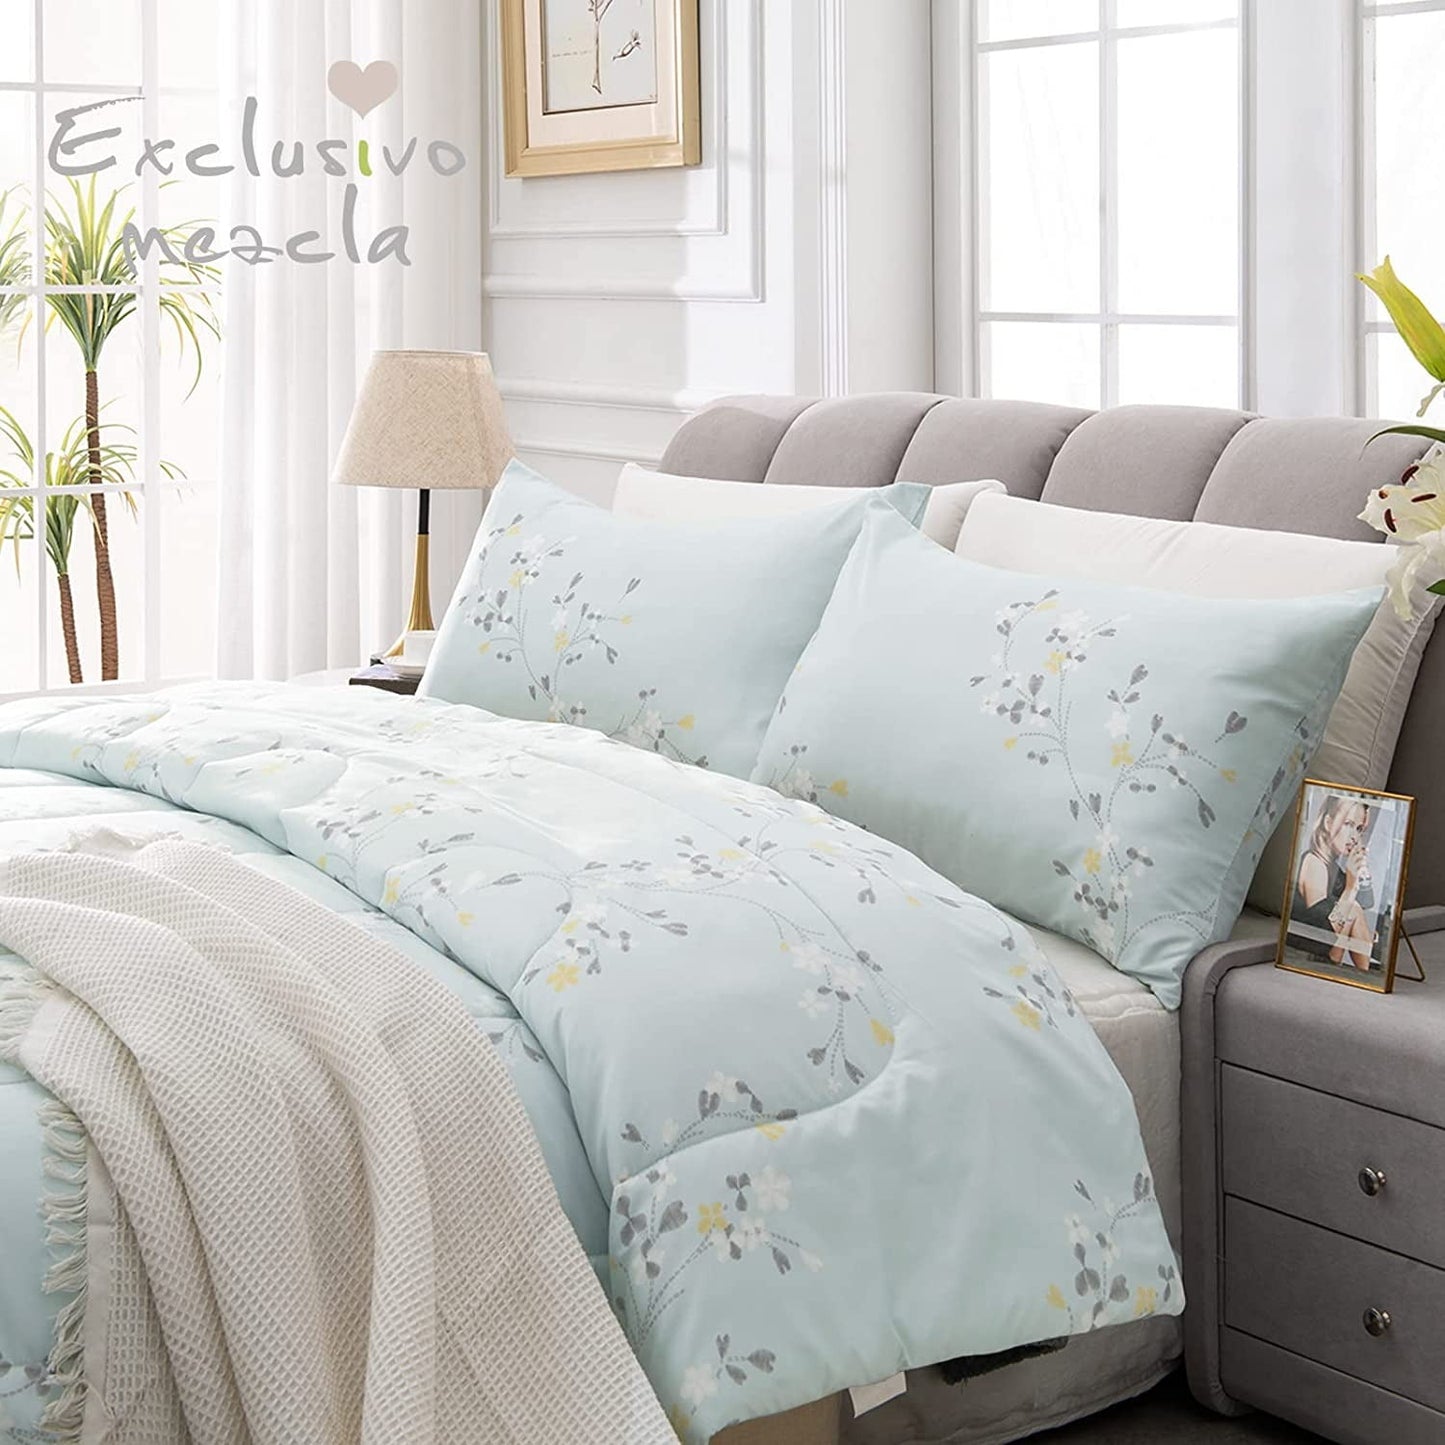 Exclusivo Mezcla 3-Piece Floral King Size Comforter Set, Microfiber Bedding Down Alternative Comforter for All Seasons with 2 Pillow Shams, Baby Blue